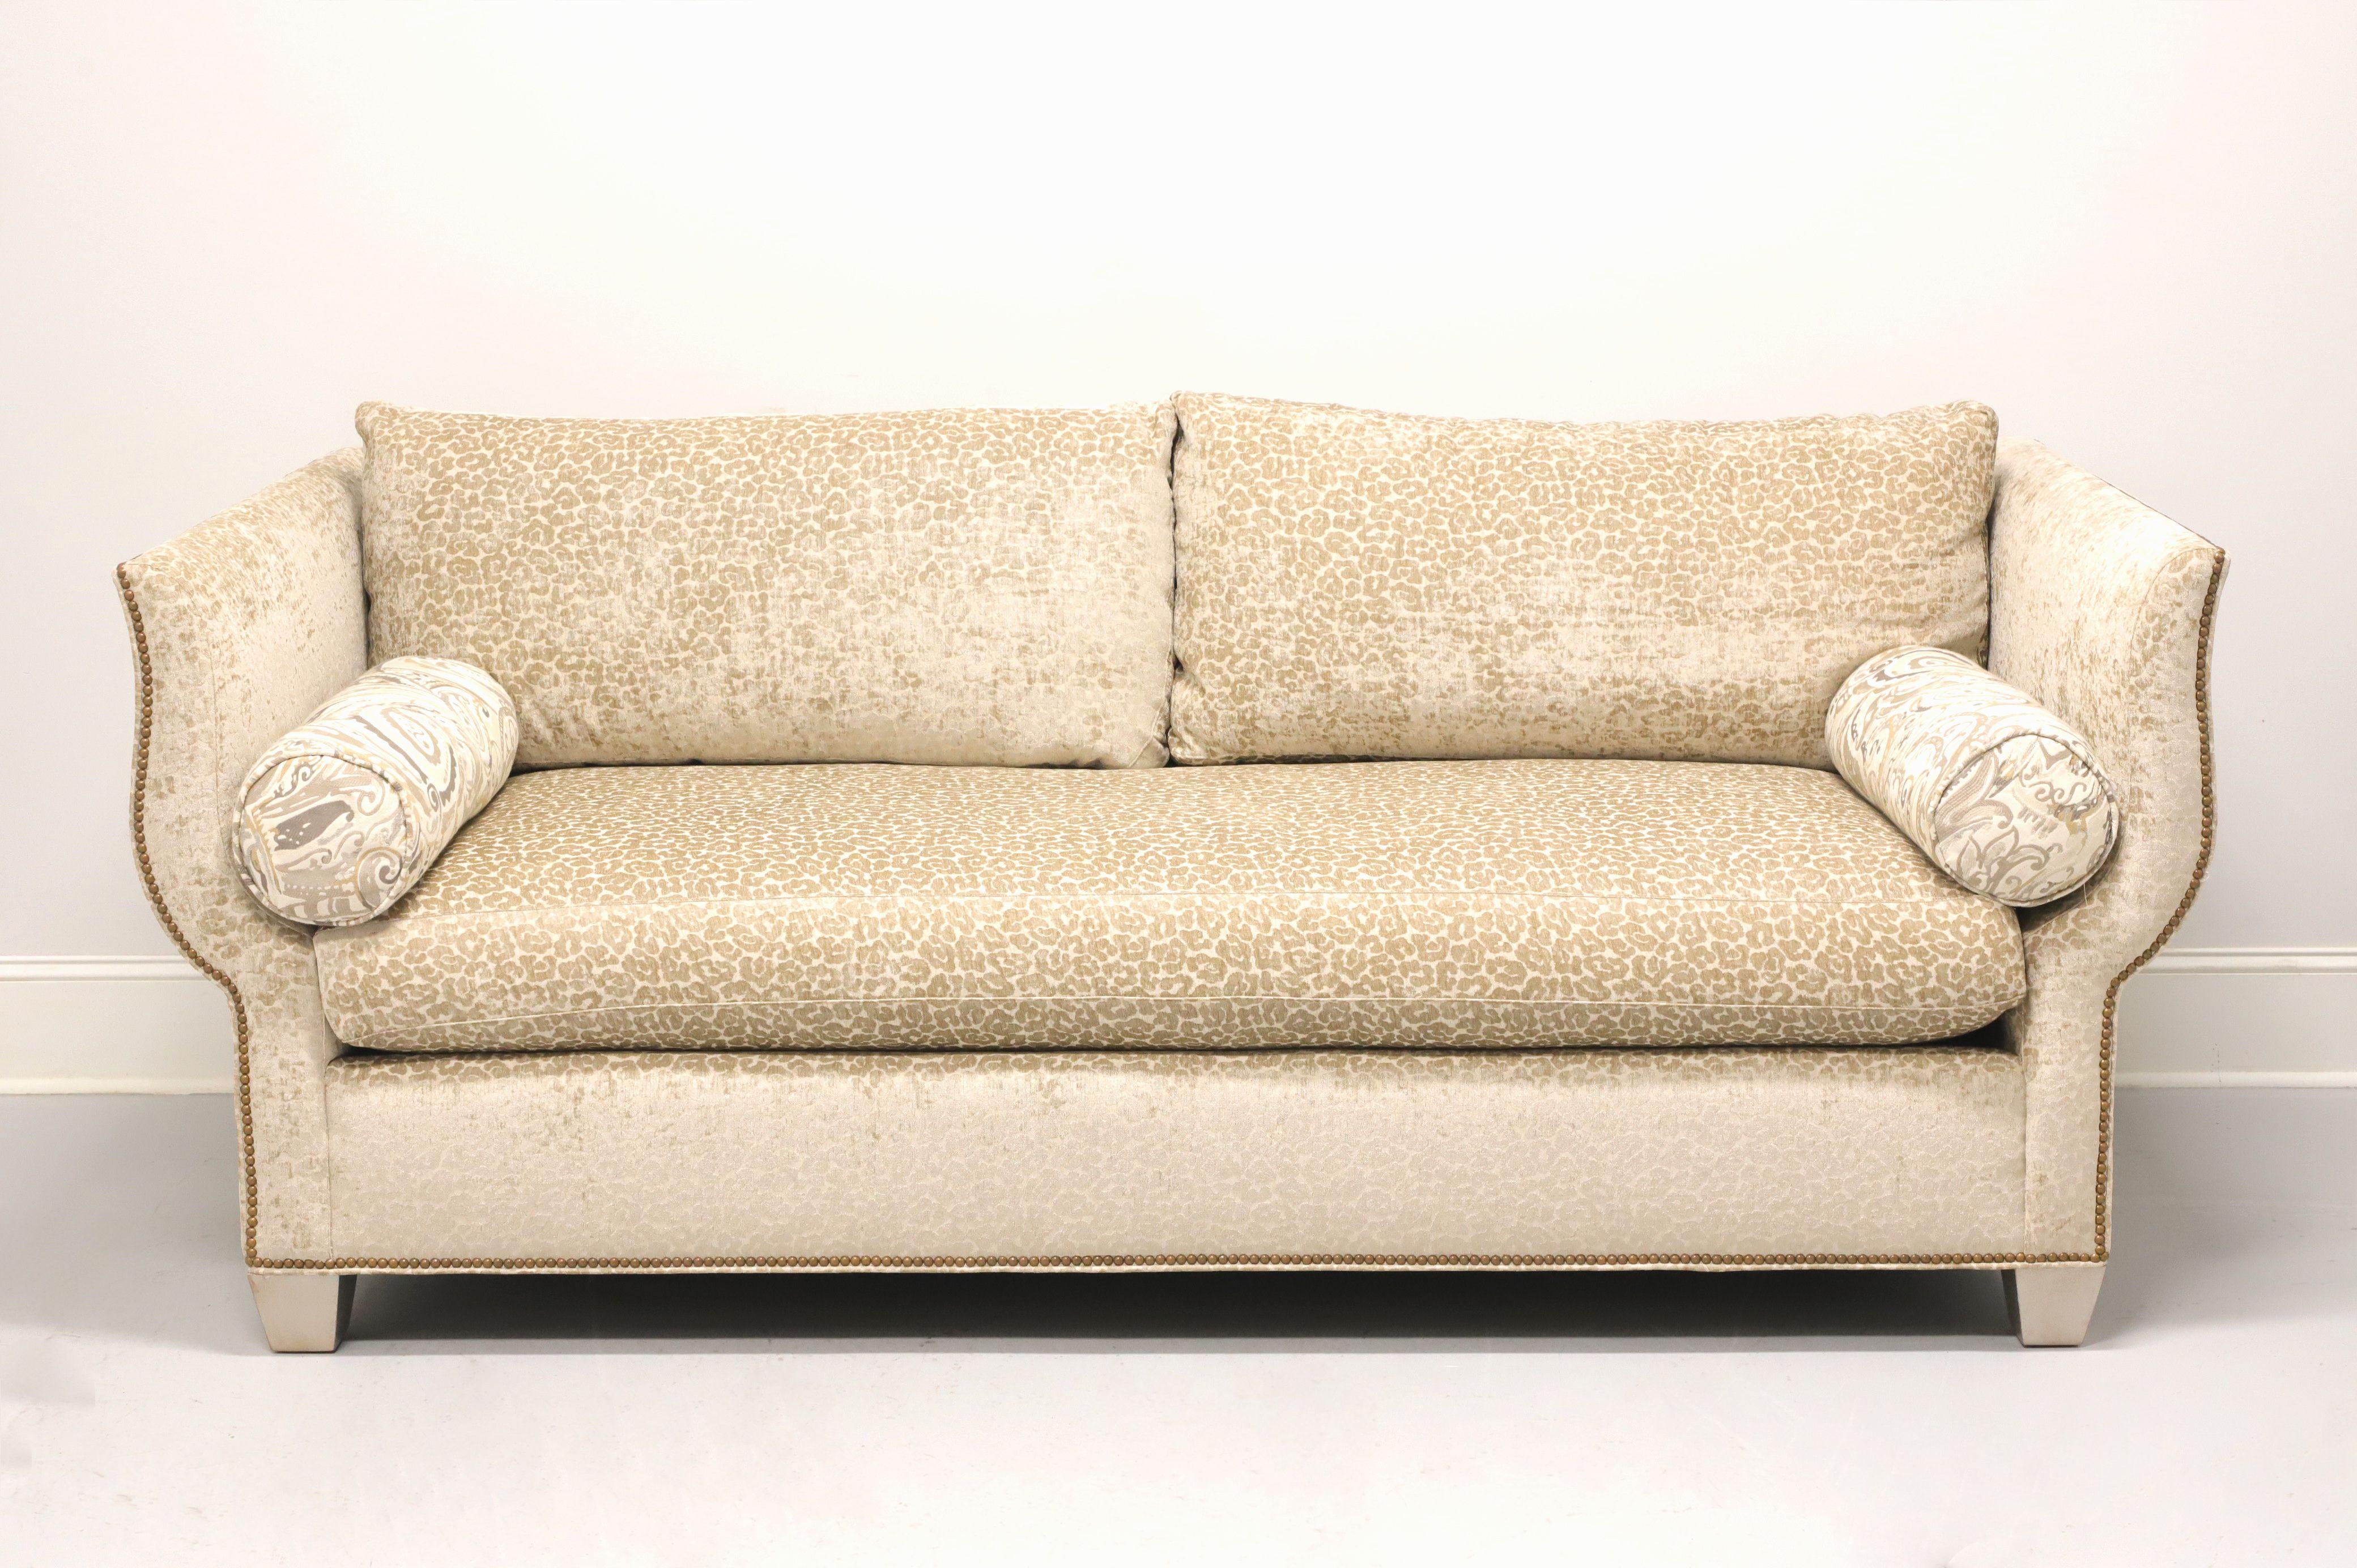 HICKORY WHITE Transitional Leopard Print Sofa with Nailhead Trim For Sale 12